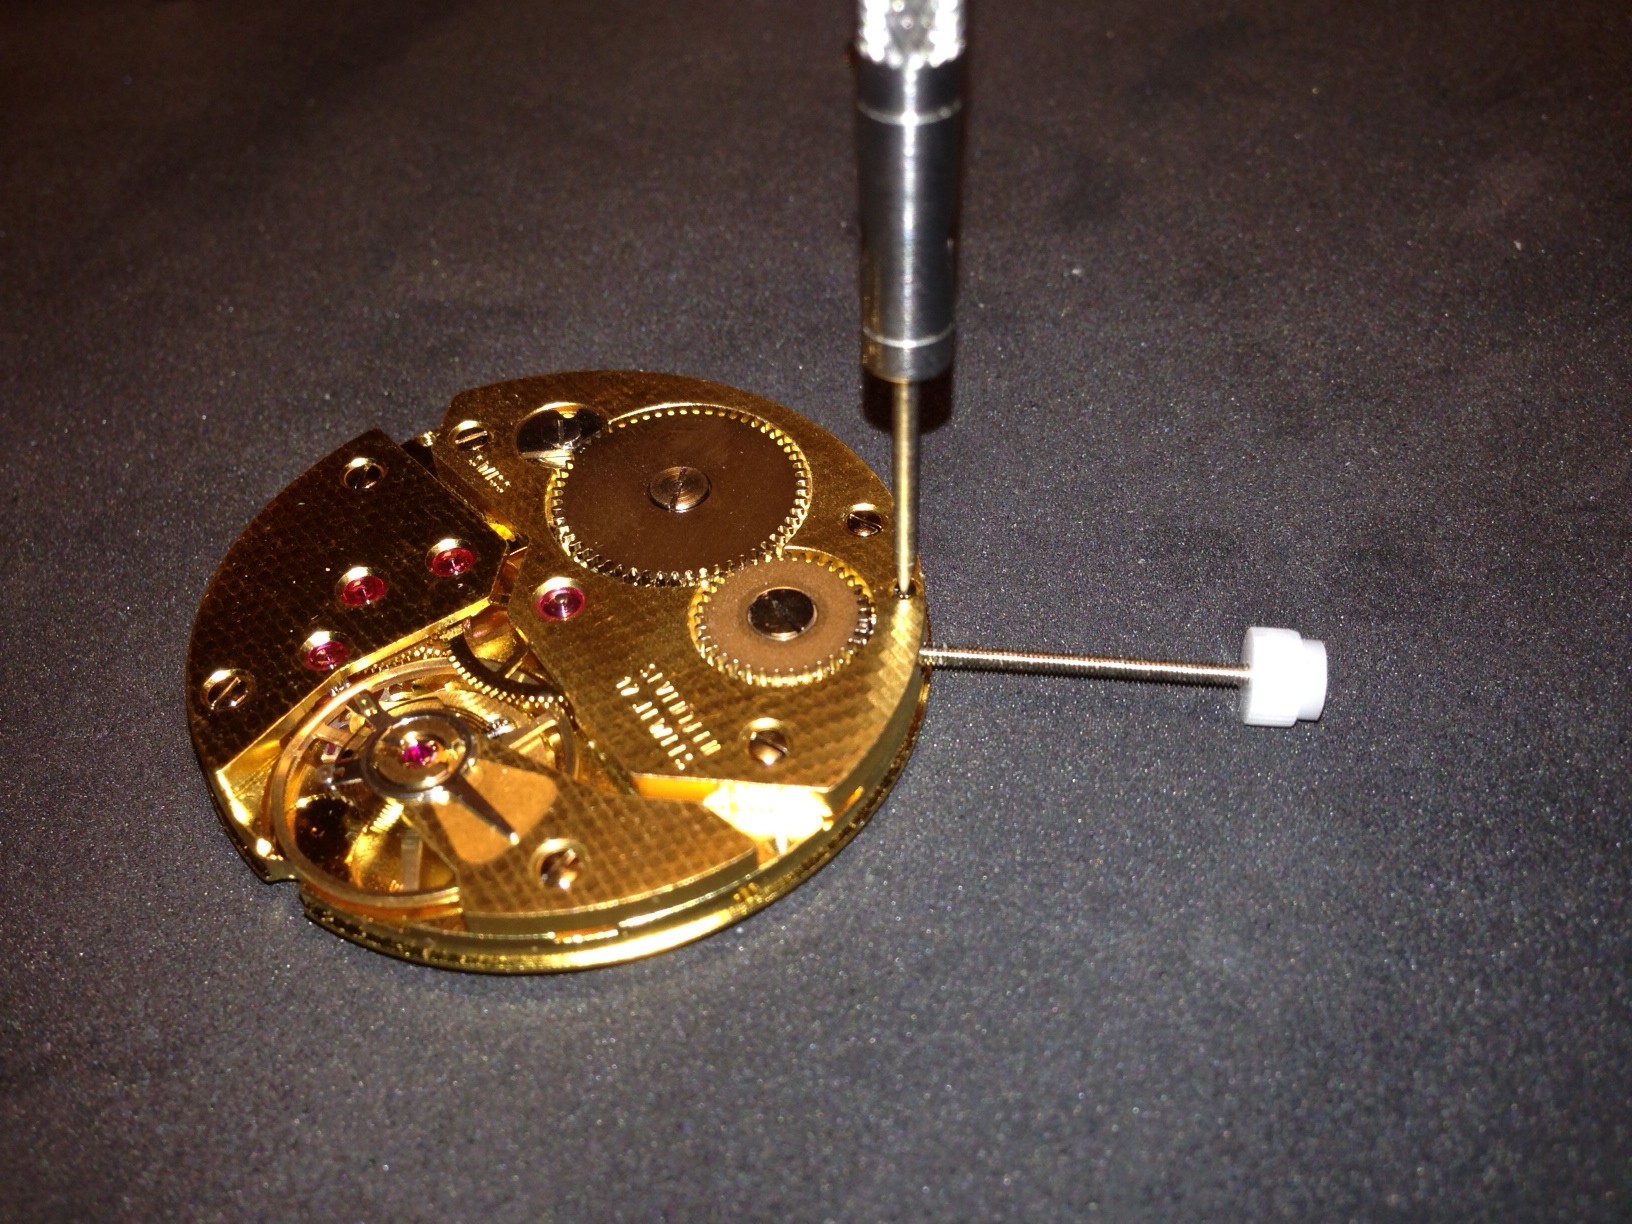 How to build your own mechanical watch - Remove the stem from the movement